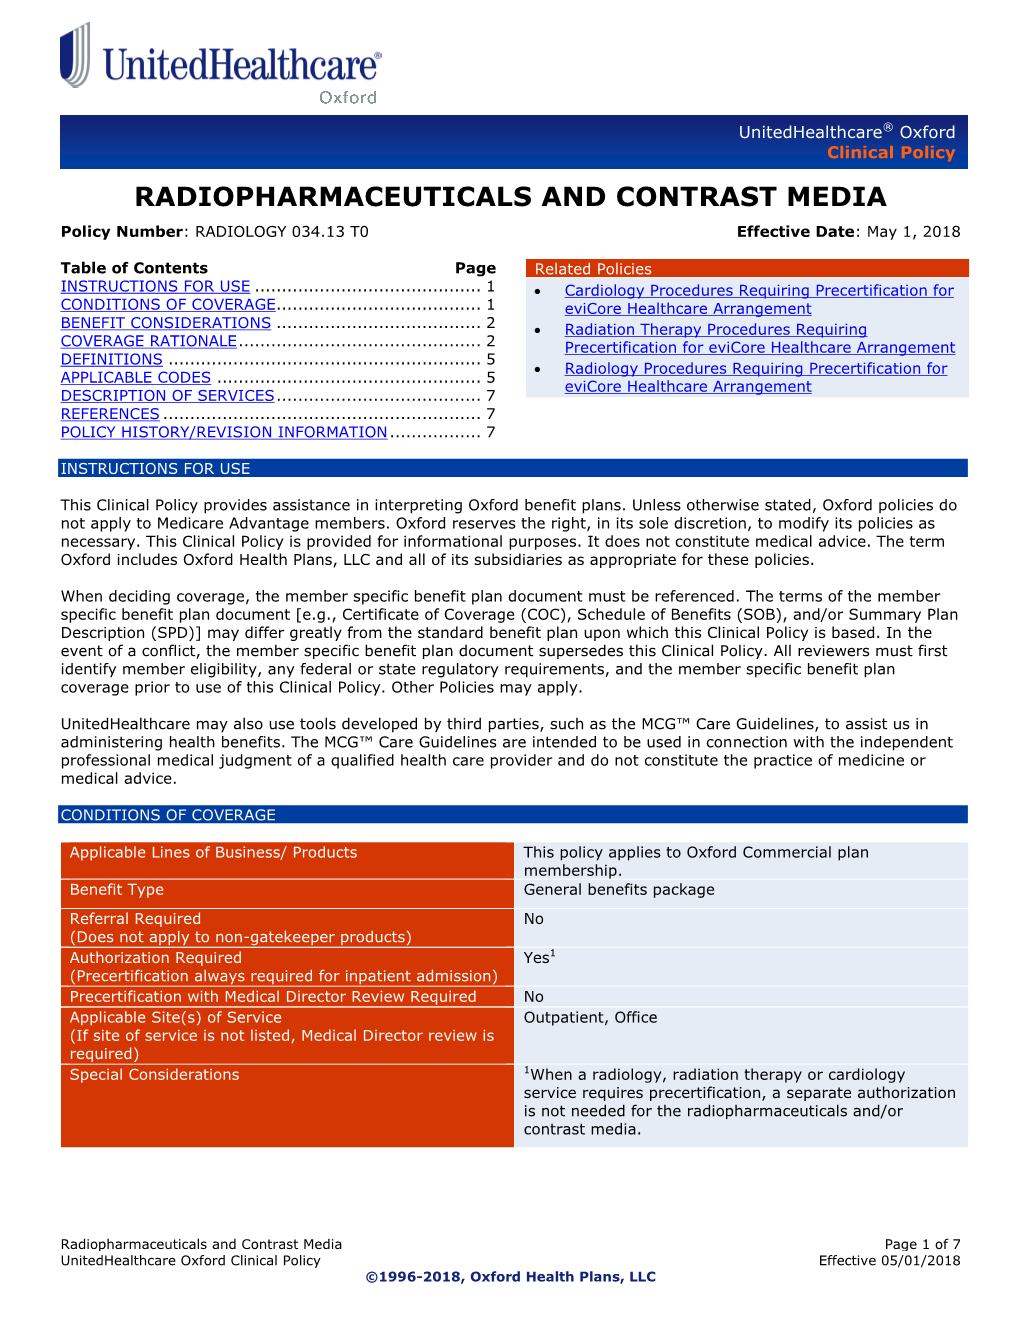 RADIOPHARMACEUTICALS and CONTRAST MEDIA Policy Number: RADIOLOGY 034.13 T0 Effective Date: May 1, 2018